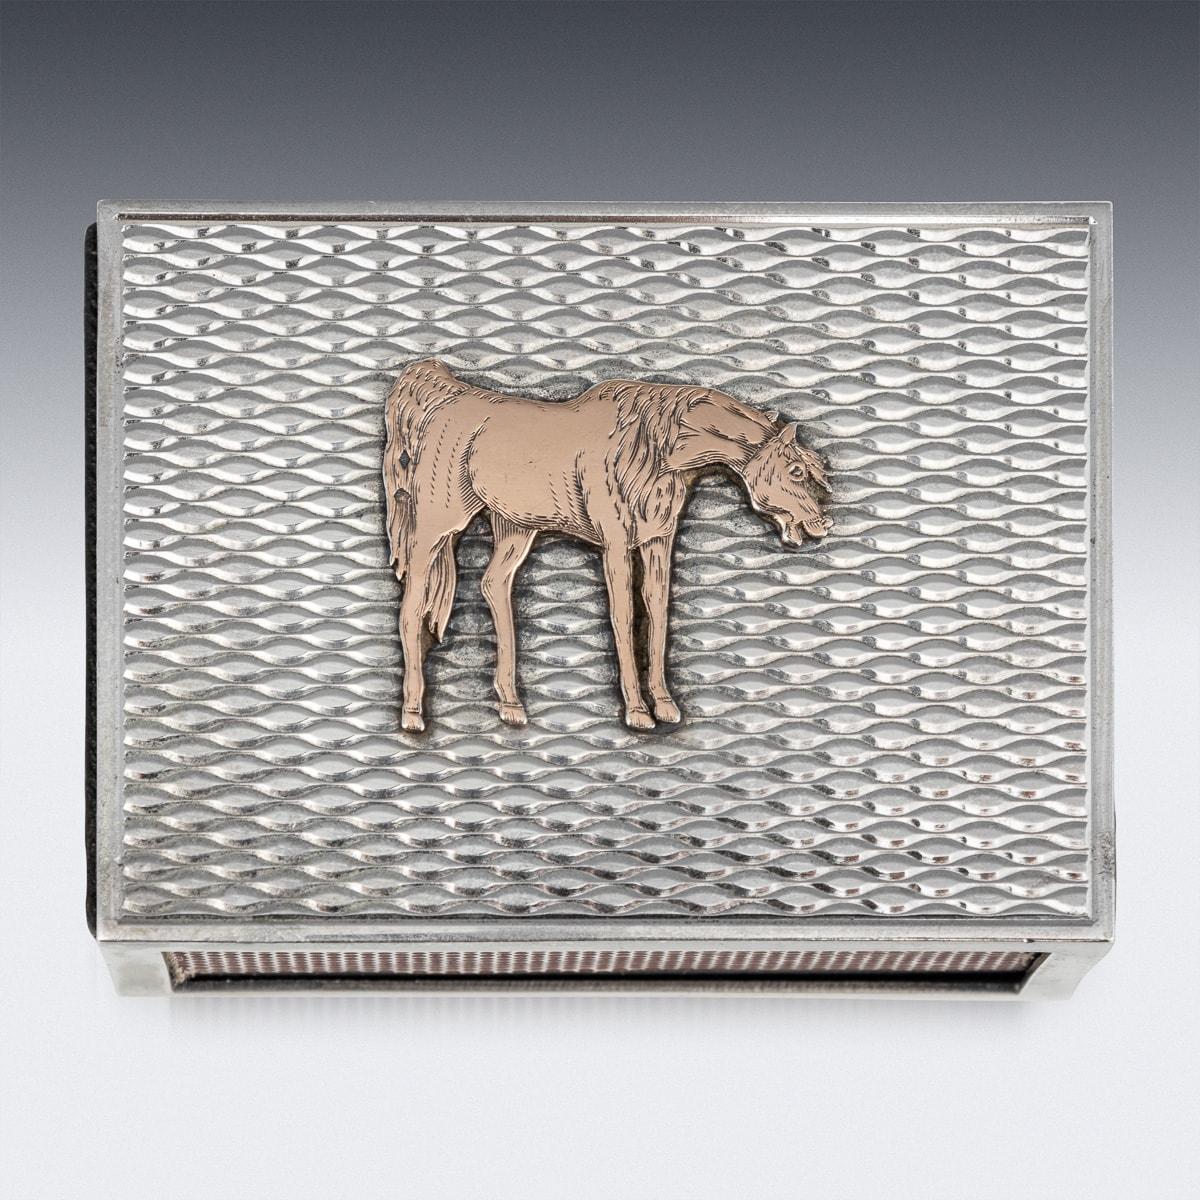 French Hermes Solid Silver Cigarette Box & Matchbox With Gold Horse Detail c.1960 For Sale